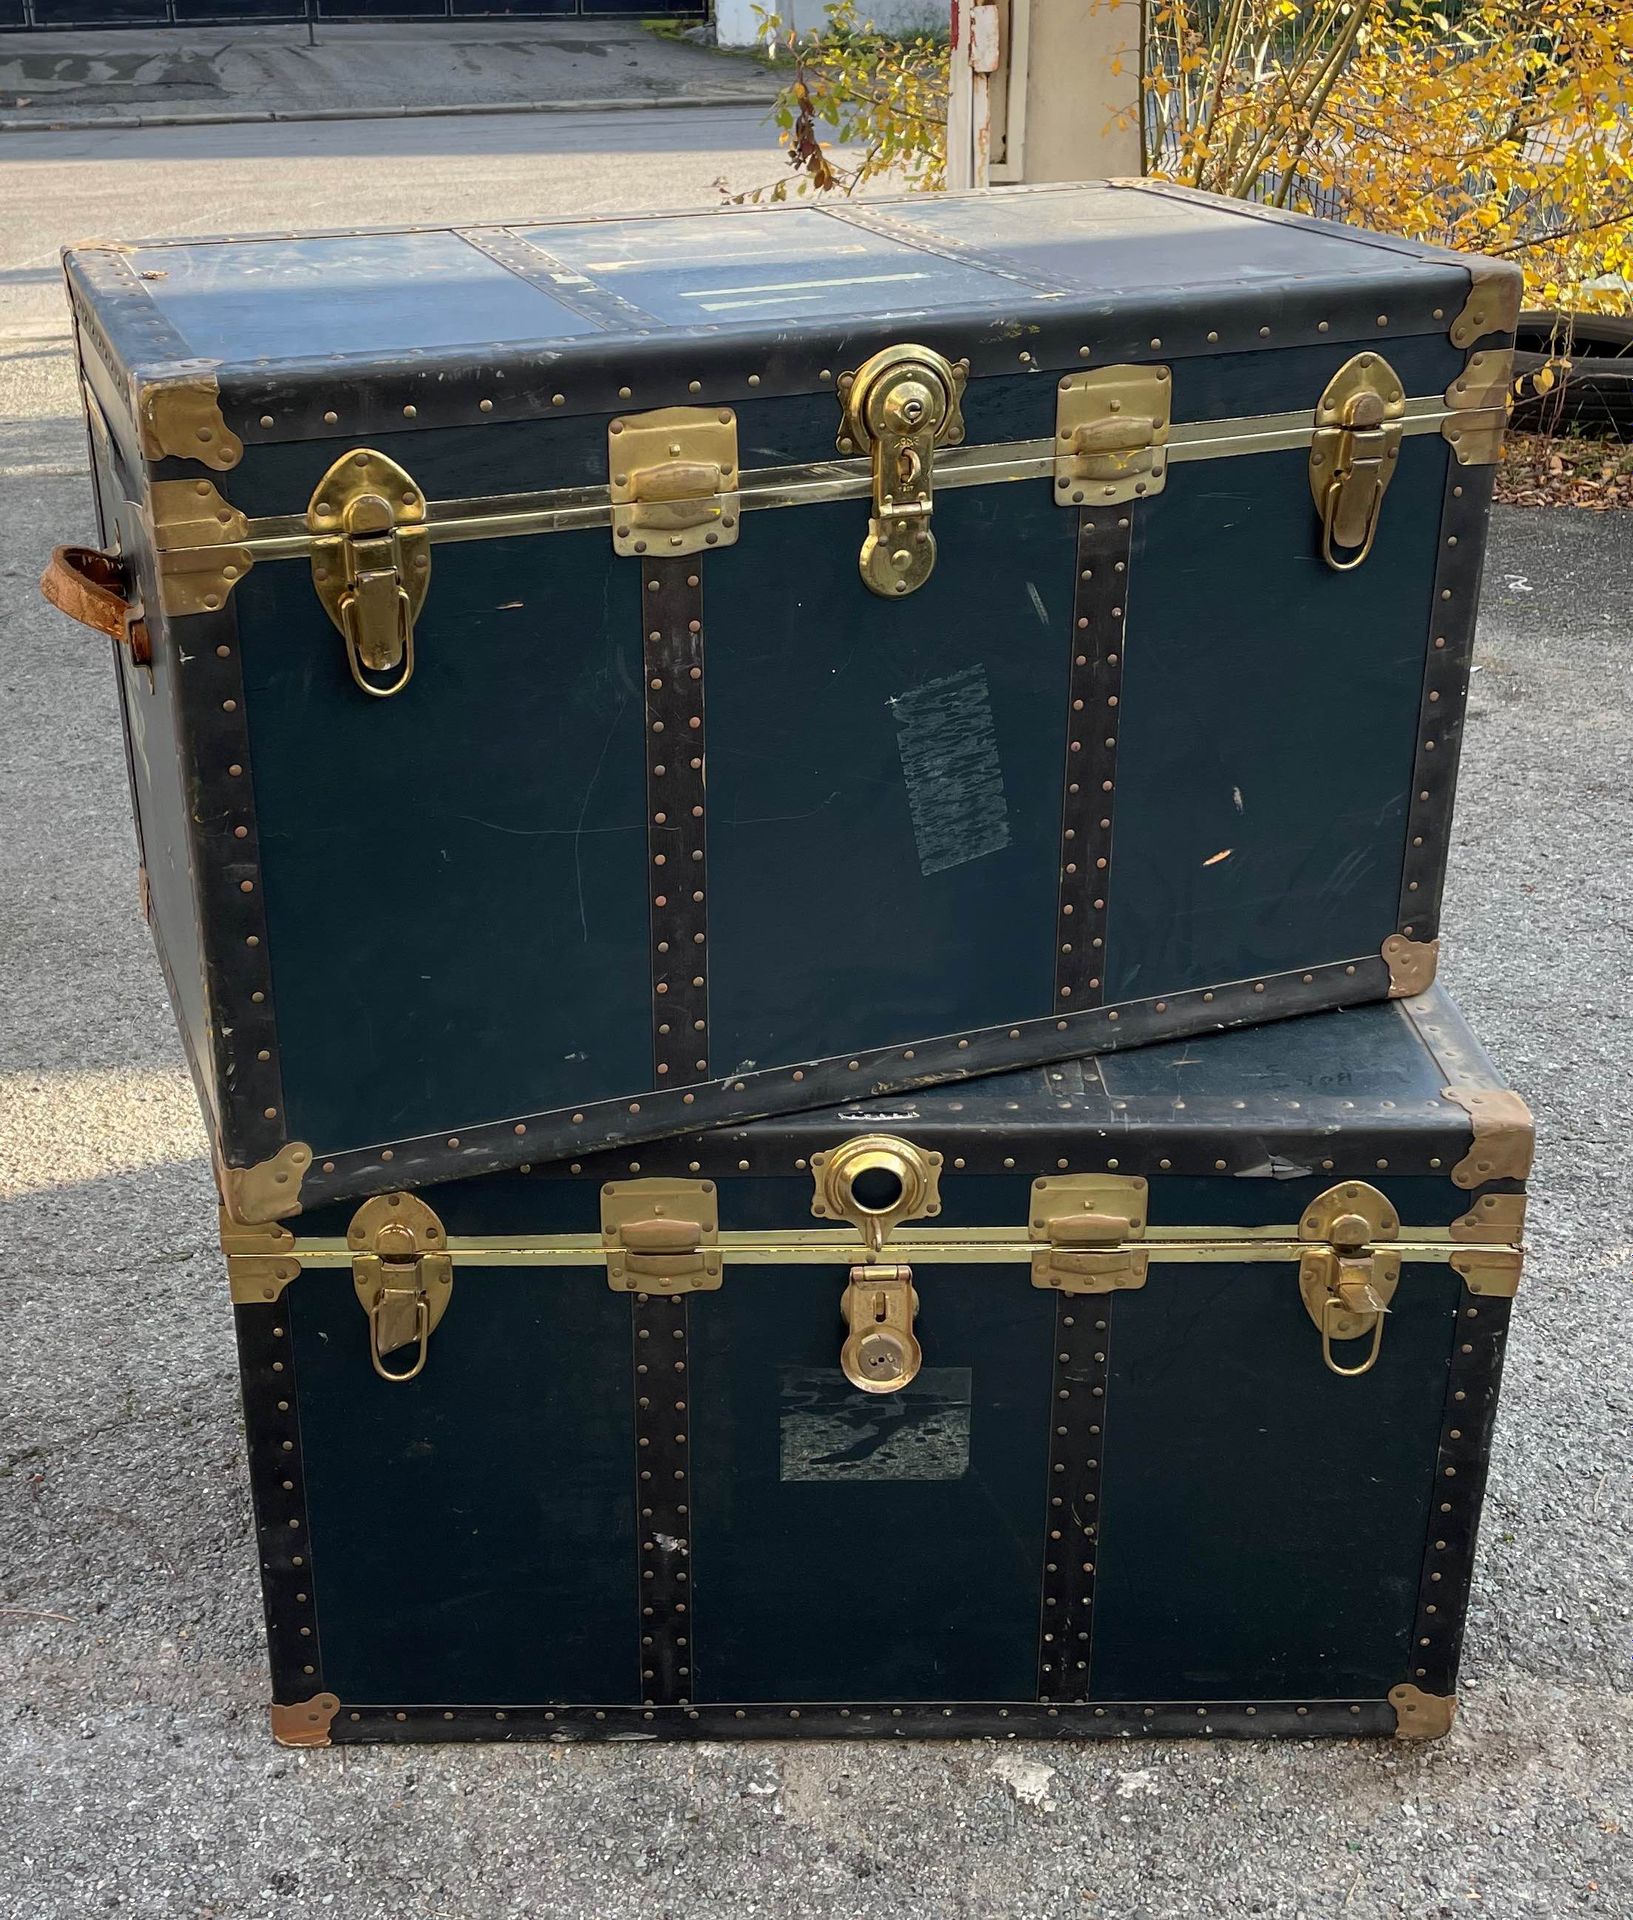 Null SEWARD. Two black lacquered trunks, brass fittings, leather side handles.